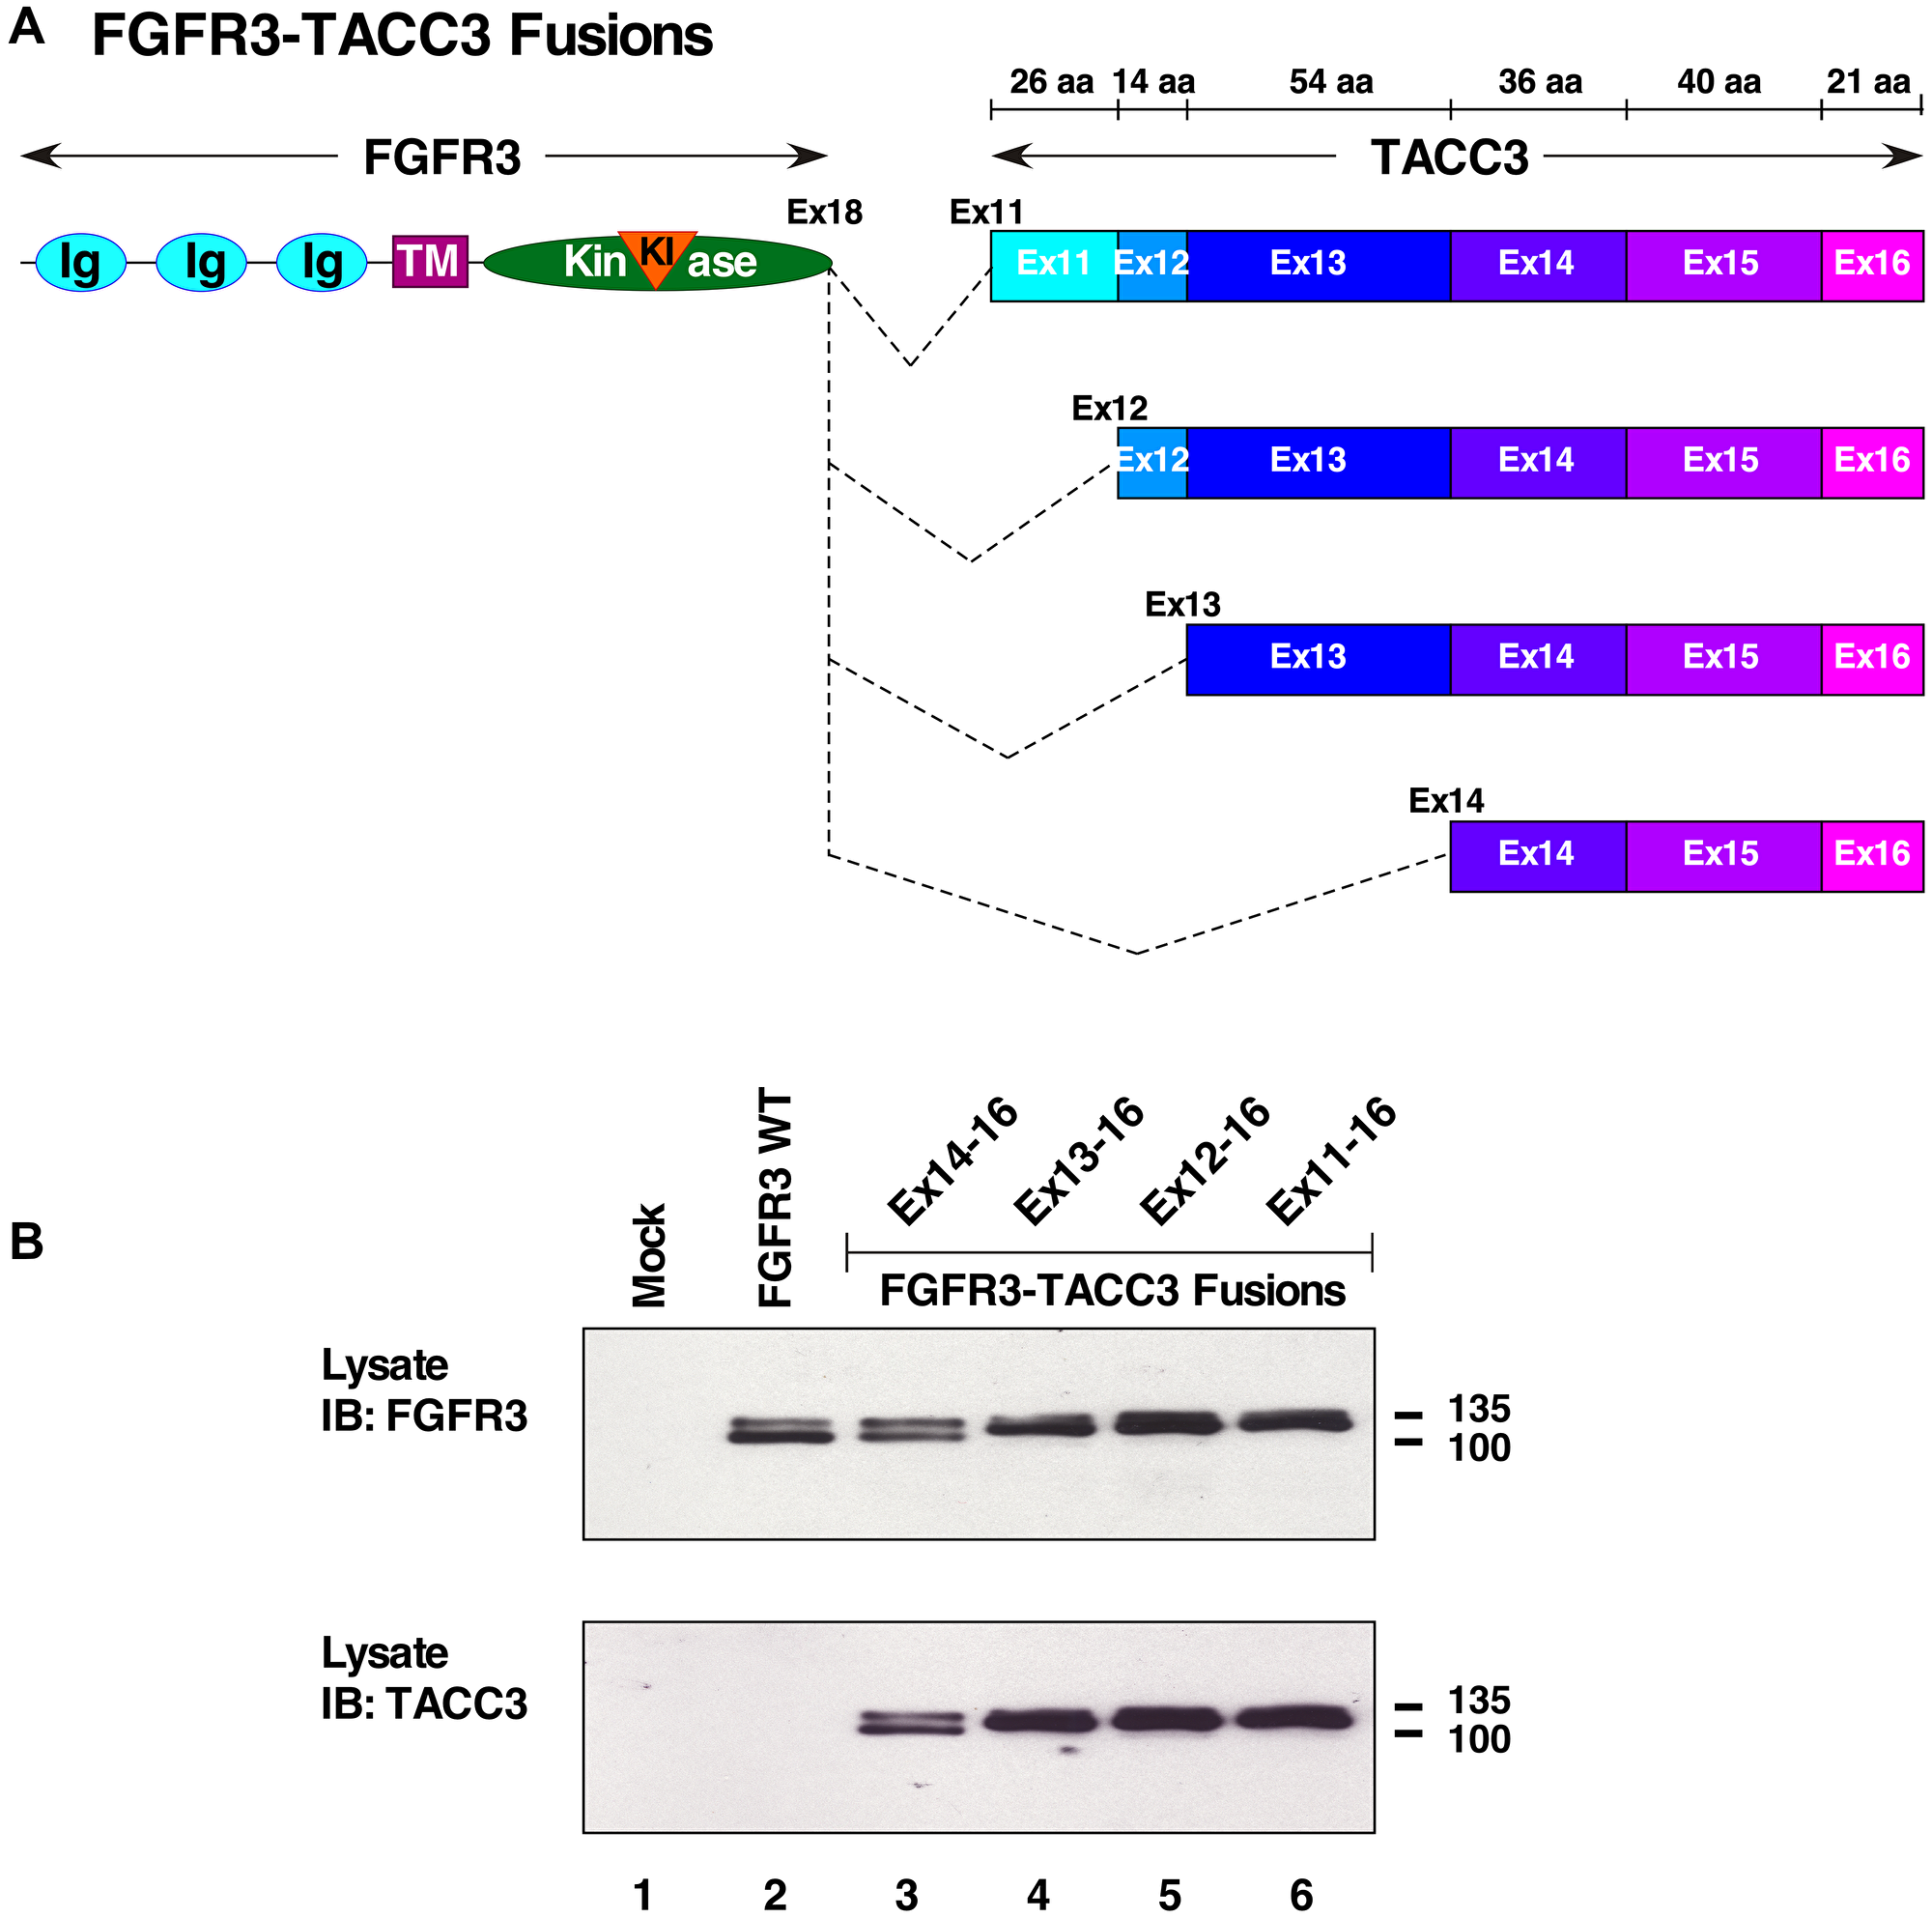 FGFR3-TACC3 fusion proteins.